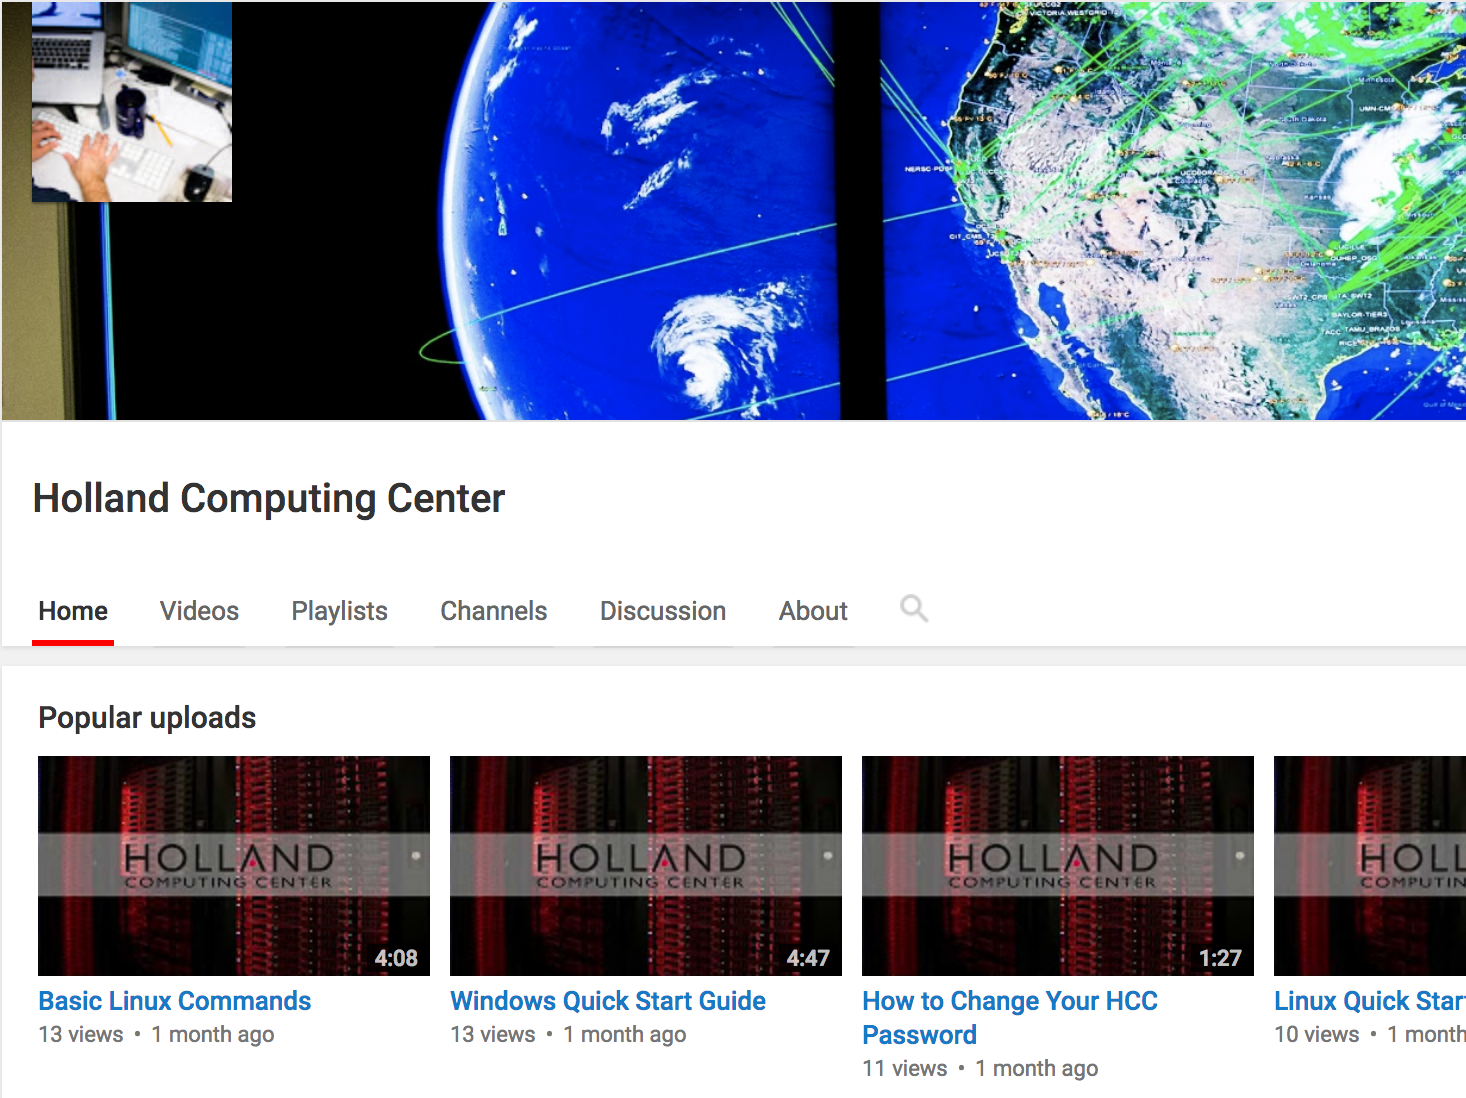 HCC Video tutorials are incorporated in our documentation pages as well as on our YouTube channel.